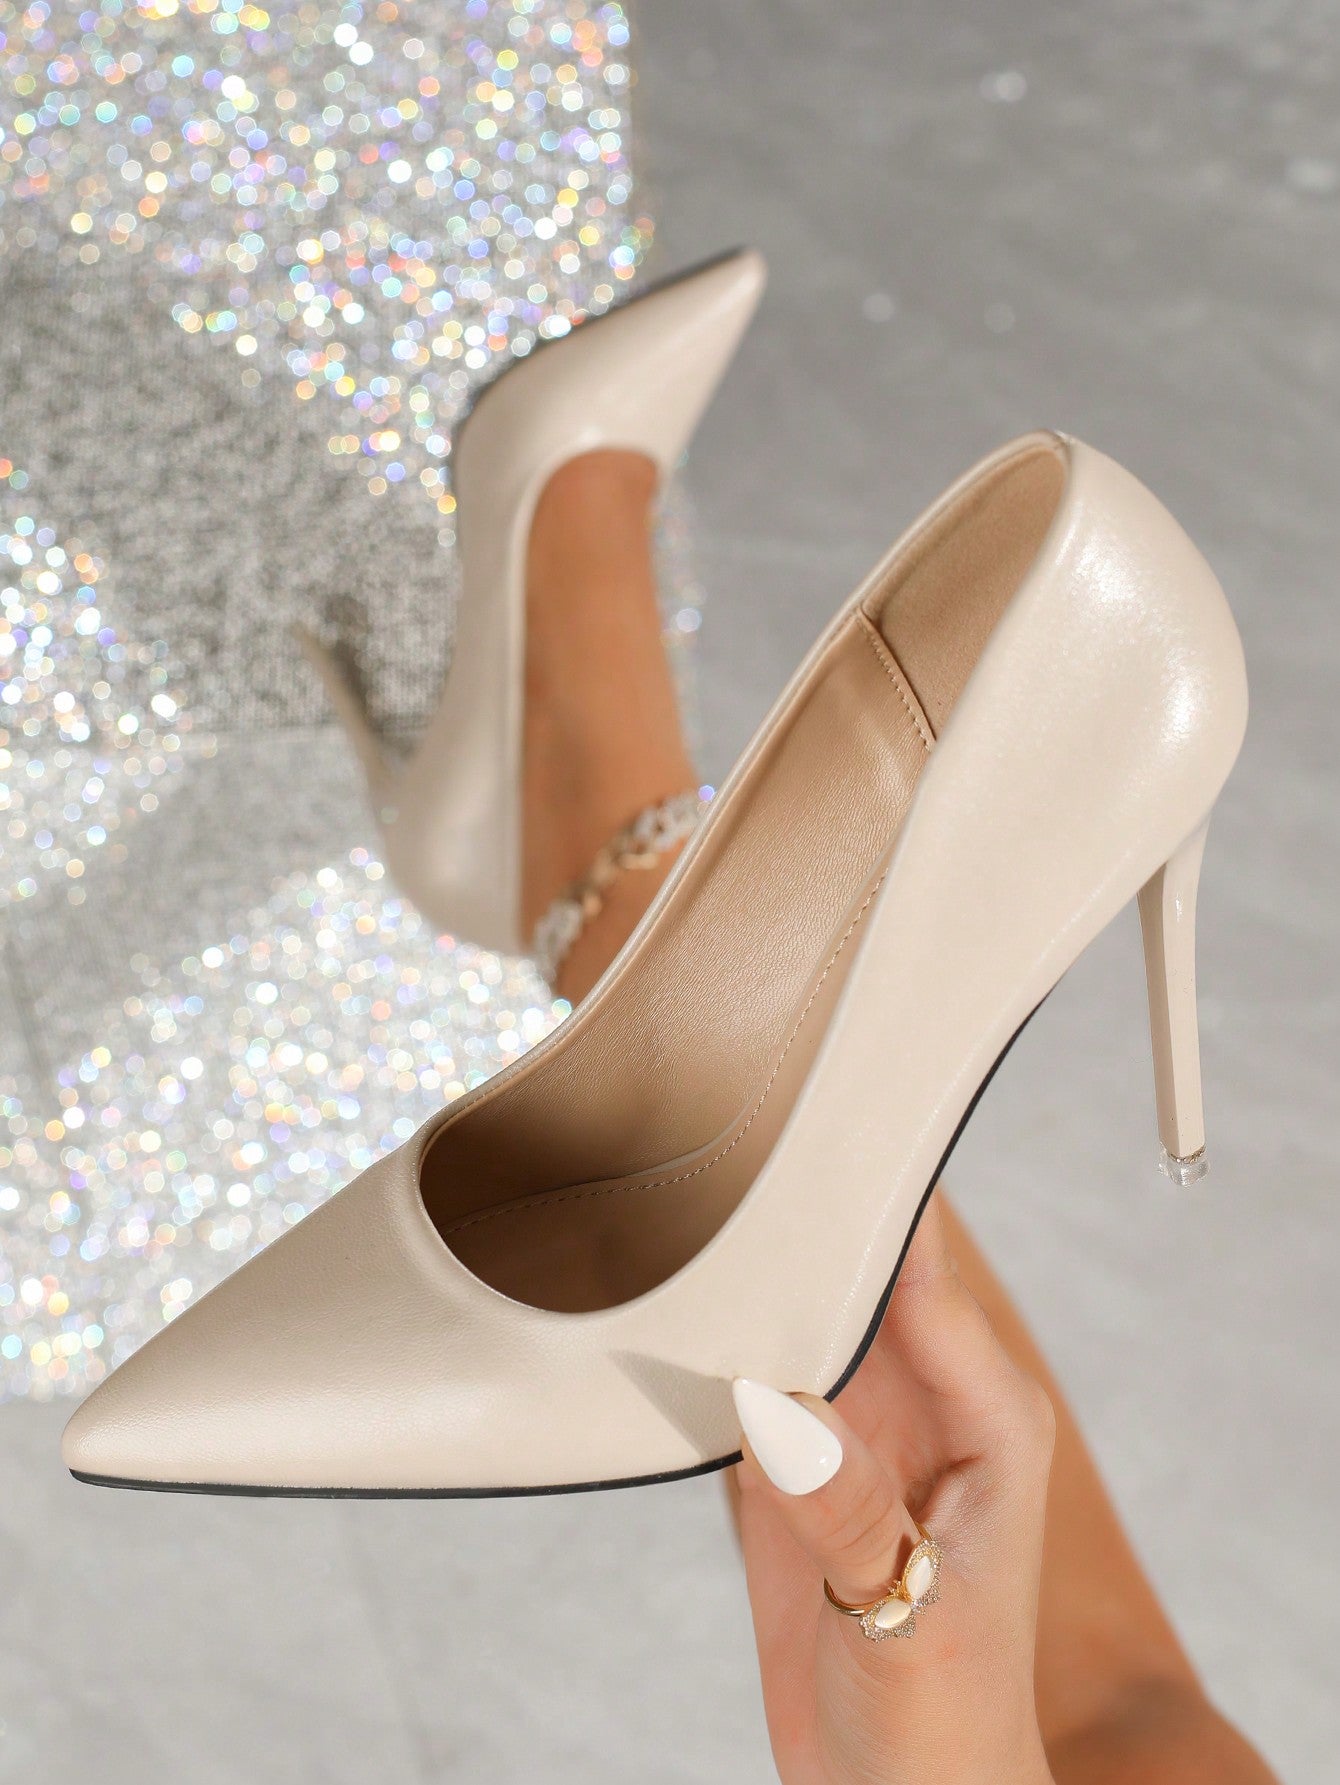 Solid Color High Heel Pumps For Evening Party, Fashionable And Slimming Design